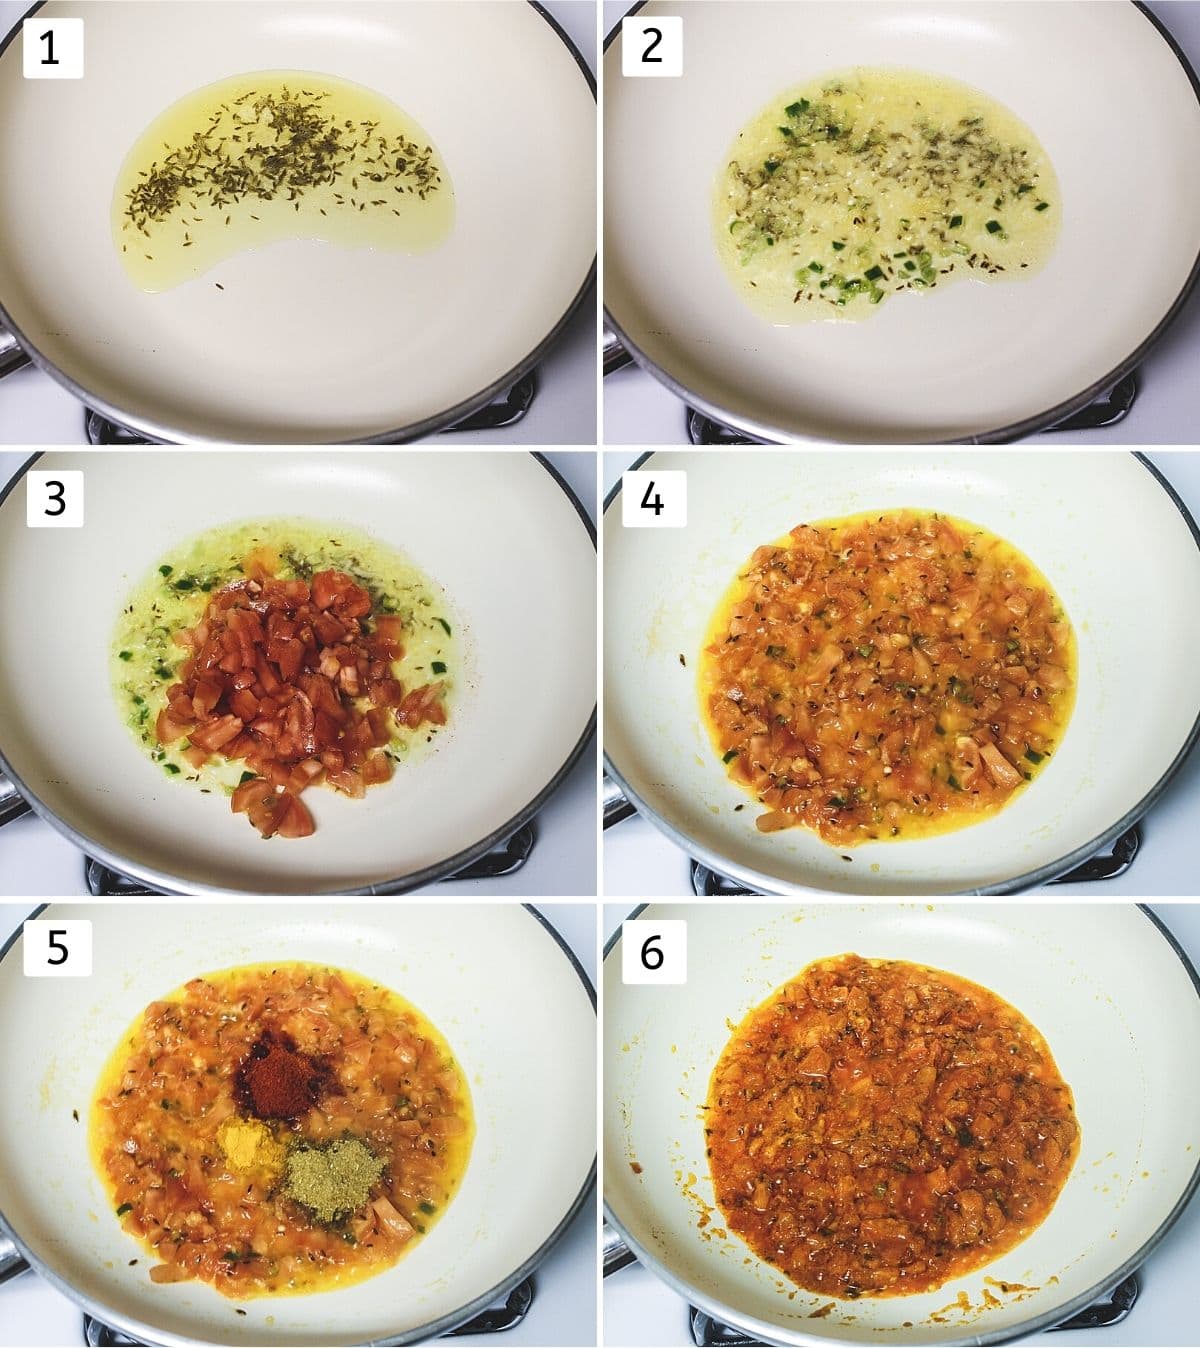 Collage of 6 steps showing adding cumin seeds in oil, adding ginger, green chili, adding tomatoes, cooking, adding spices, mixed.